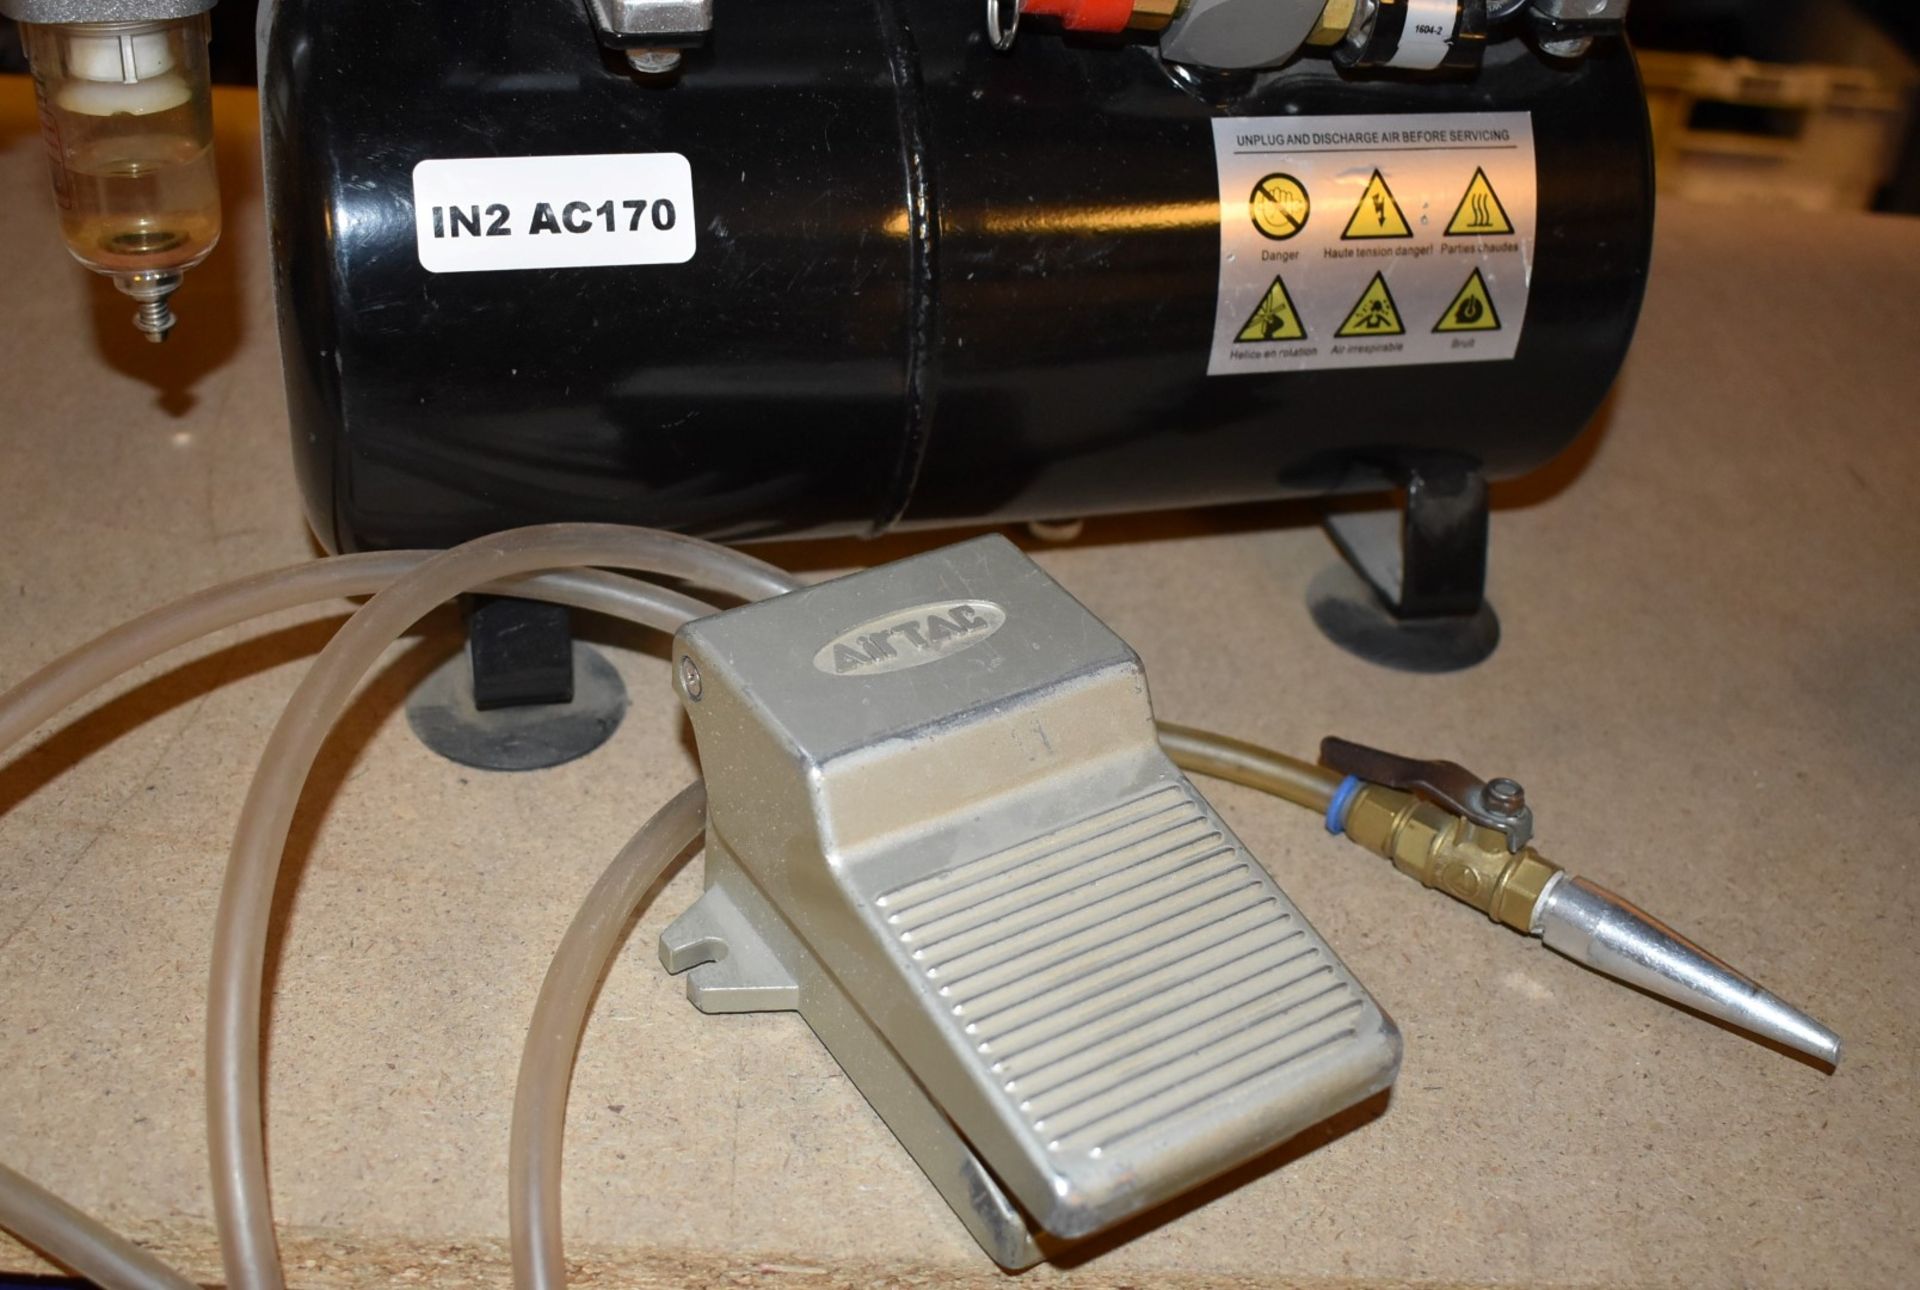 1 x Fengda AS-196 Airbrush Mini Compressor With Air Blower and Foot Pedal - 240v - Image 4 of 5